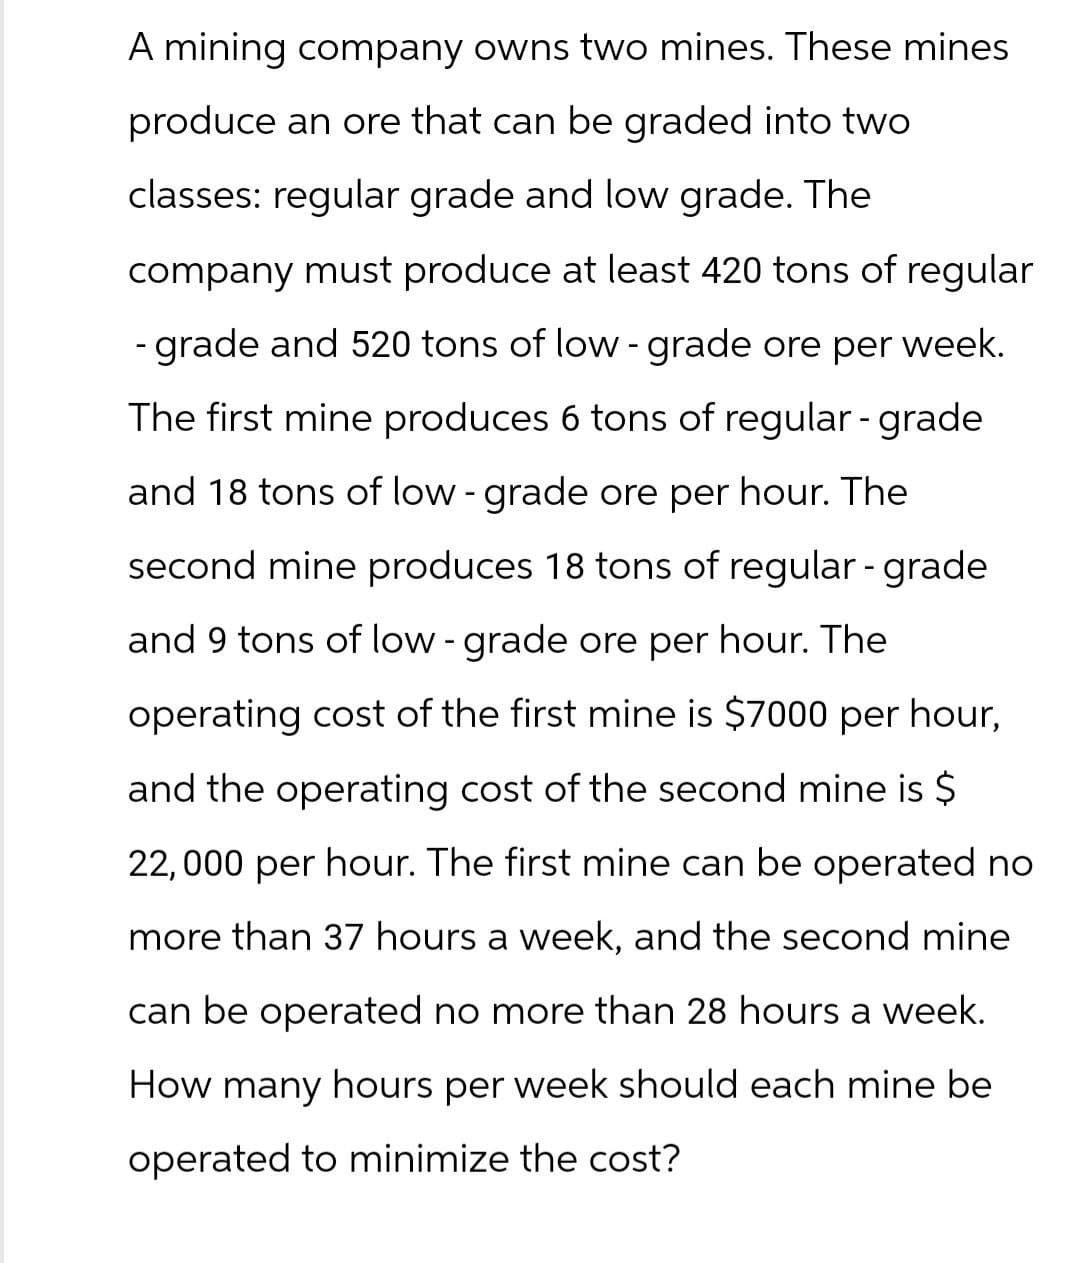 A mining company owns two mines. These mines
produce an ore that can be graded into two
classes: regular grade and low grade. The
company must produce at least 420 tons of regular
- grade and 520 tons of low-grade ore per week.
The first mine produces 6 tons of regular - grade
and 18 tons of low-grade ore per hour. The
second mine produces 18 tons of regular - grade
and 9 tons of low-grade ore per hour. The
operating cost of the first mine is $7000 per hour,
and the operating cost of the second mine is $
22,000 per hour. The first mine can be operated no
more than 37 hours a week, and the second mine
can be operated no more than 28 hours a week.
How many hours per
week should each mine be
operated to minimize the cost?